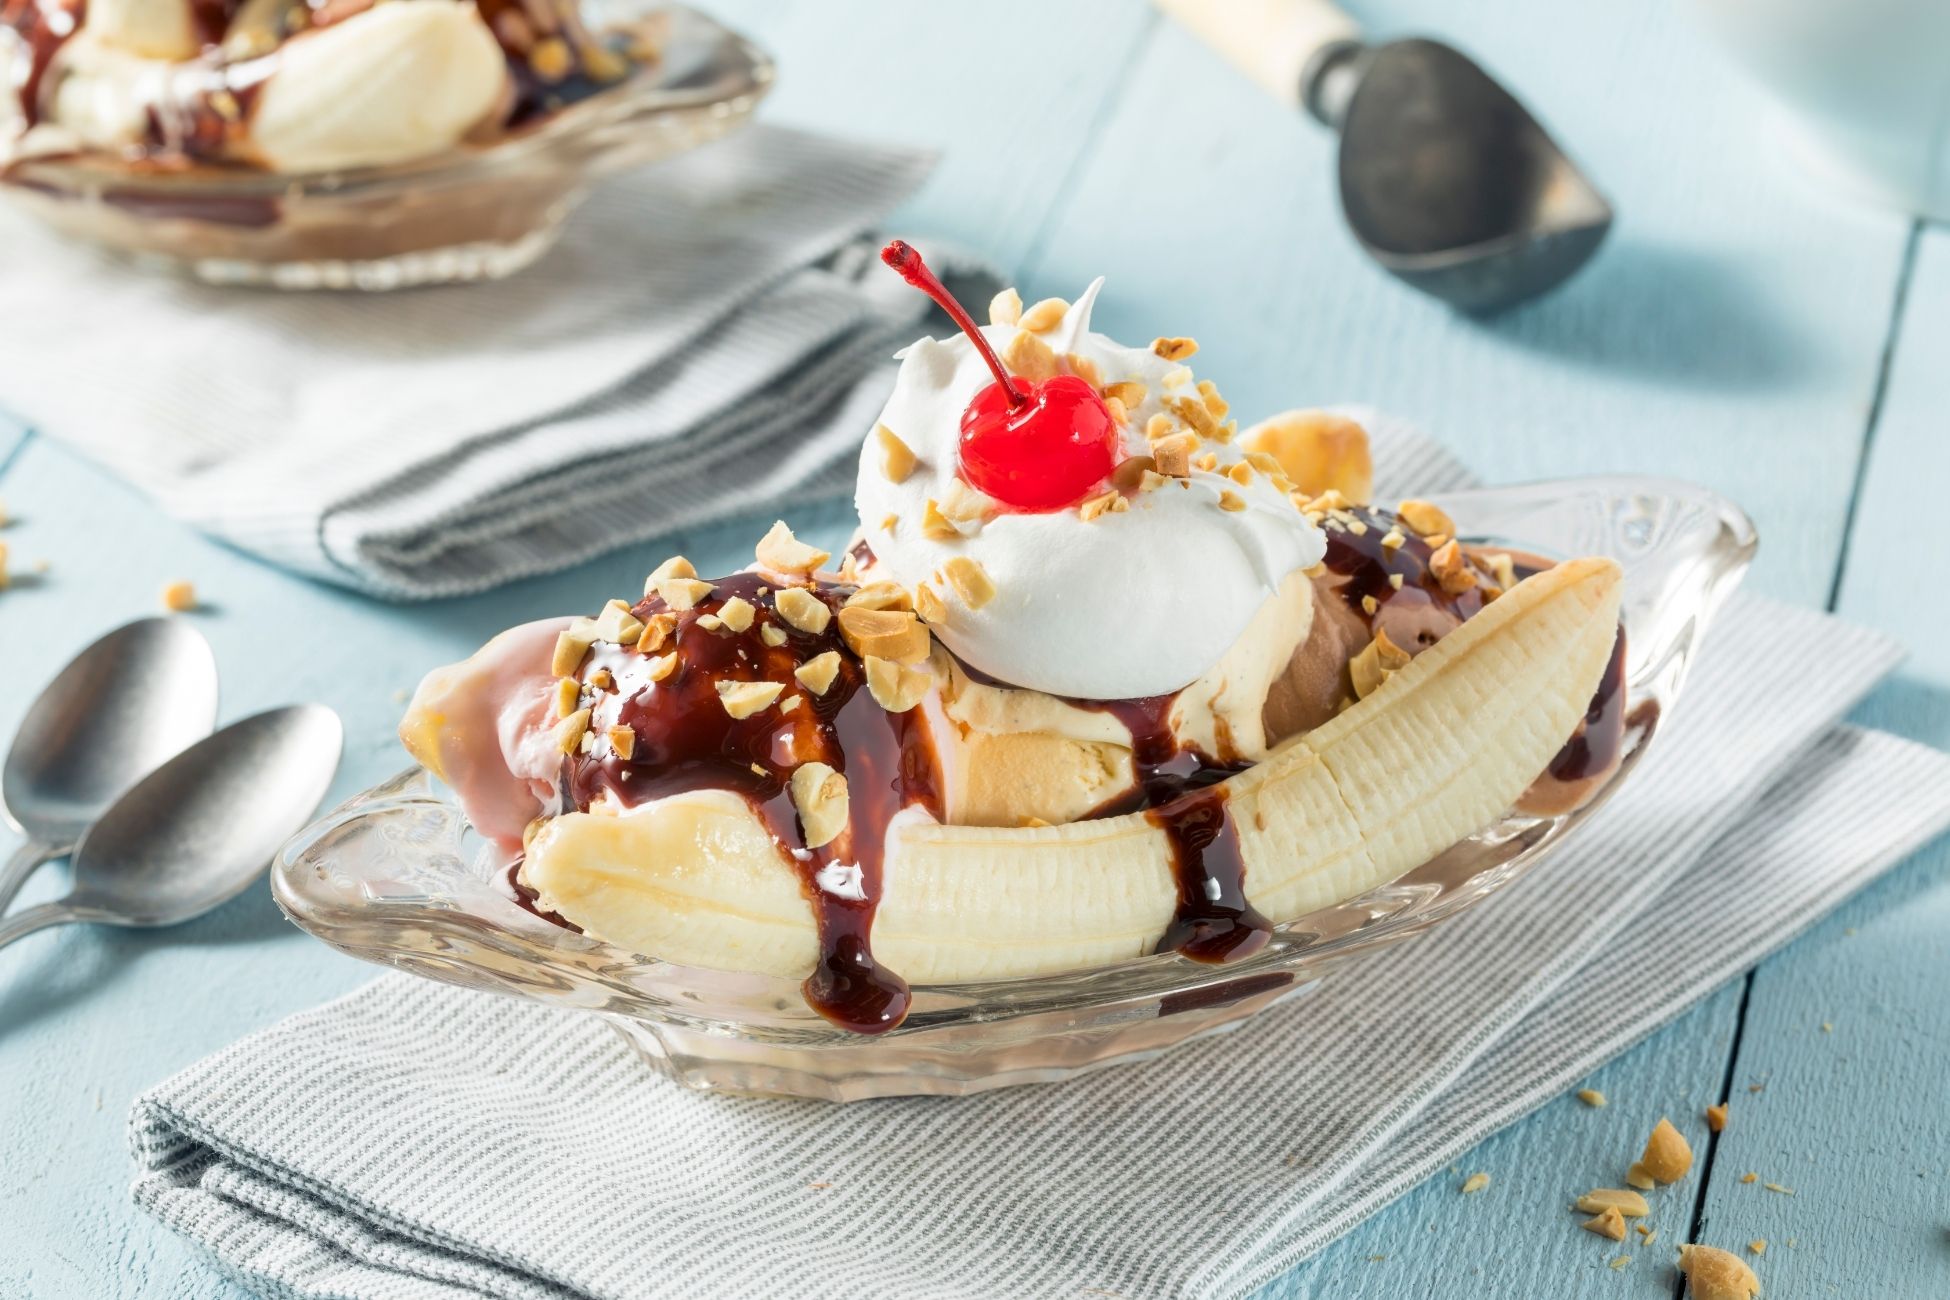 How to Make the Best Old Fashioned Banana Split